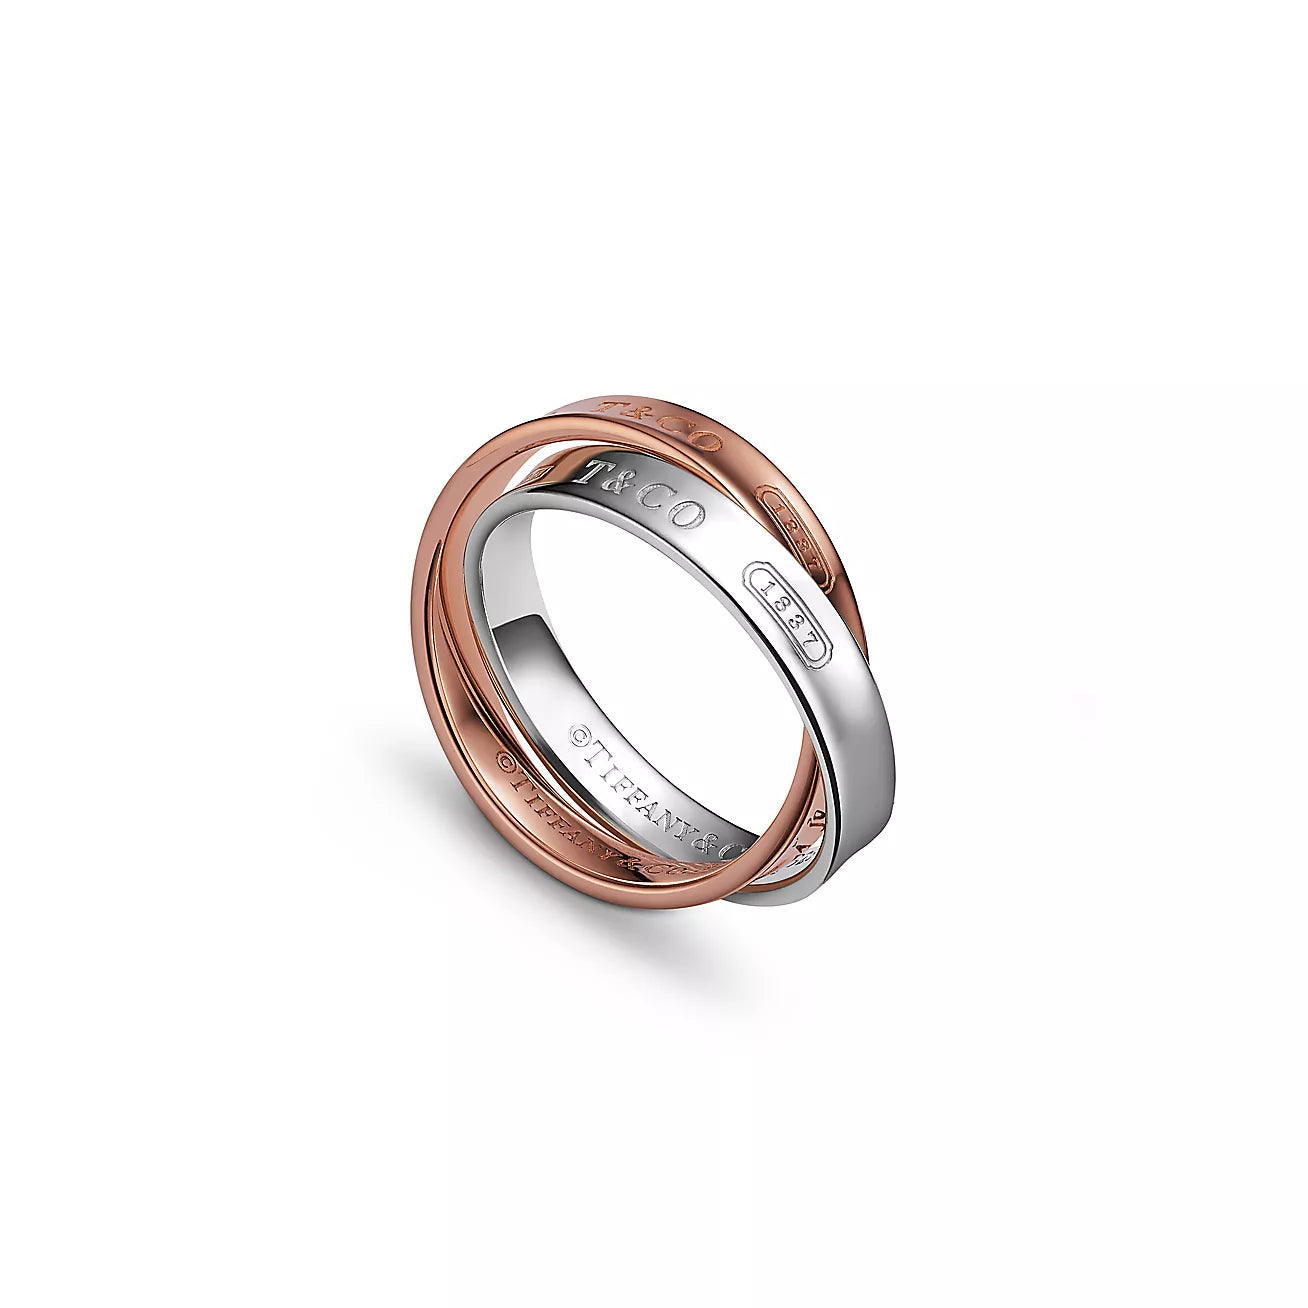 Tiffany 1837® Interlocking Circles Ring in Rose Gold and Sterling Silver